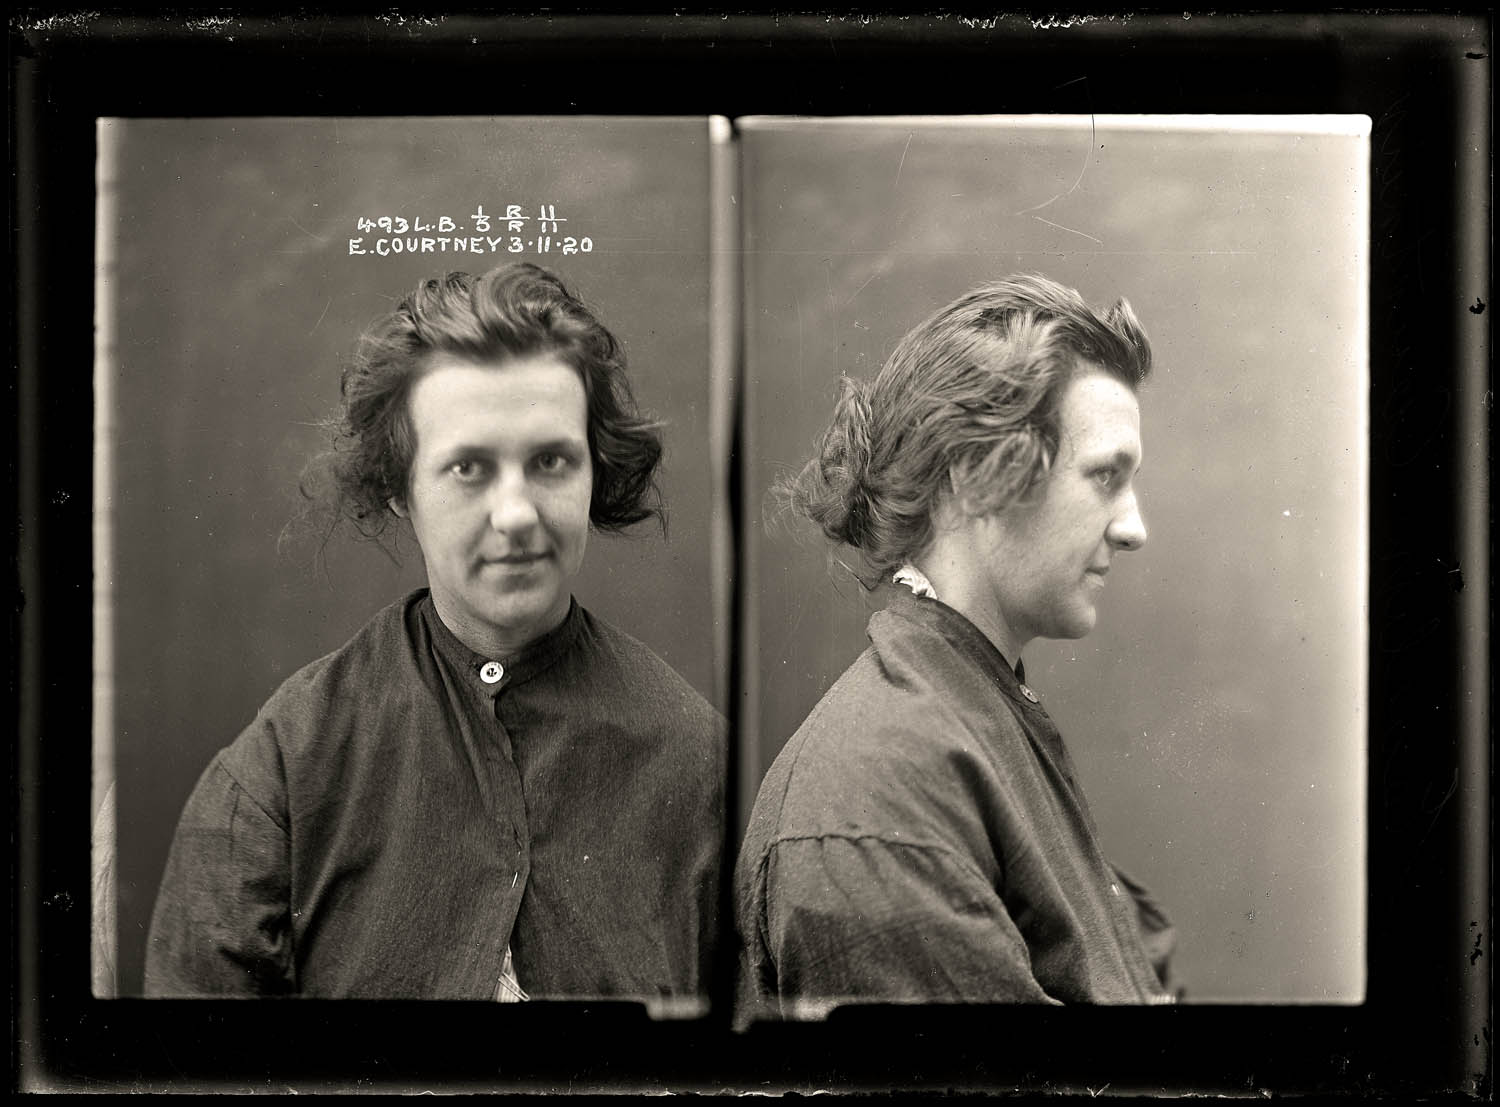 Evelyn Courtney, criminal record number 493LB, 3 November 1920. State Reformatory for Women, Long Bay, NSW 